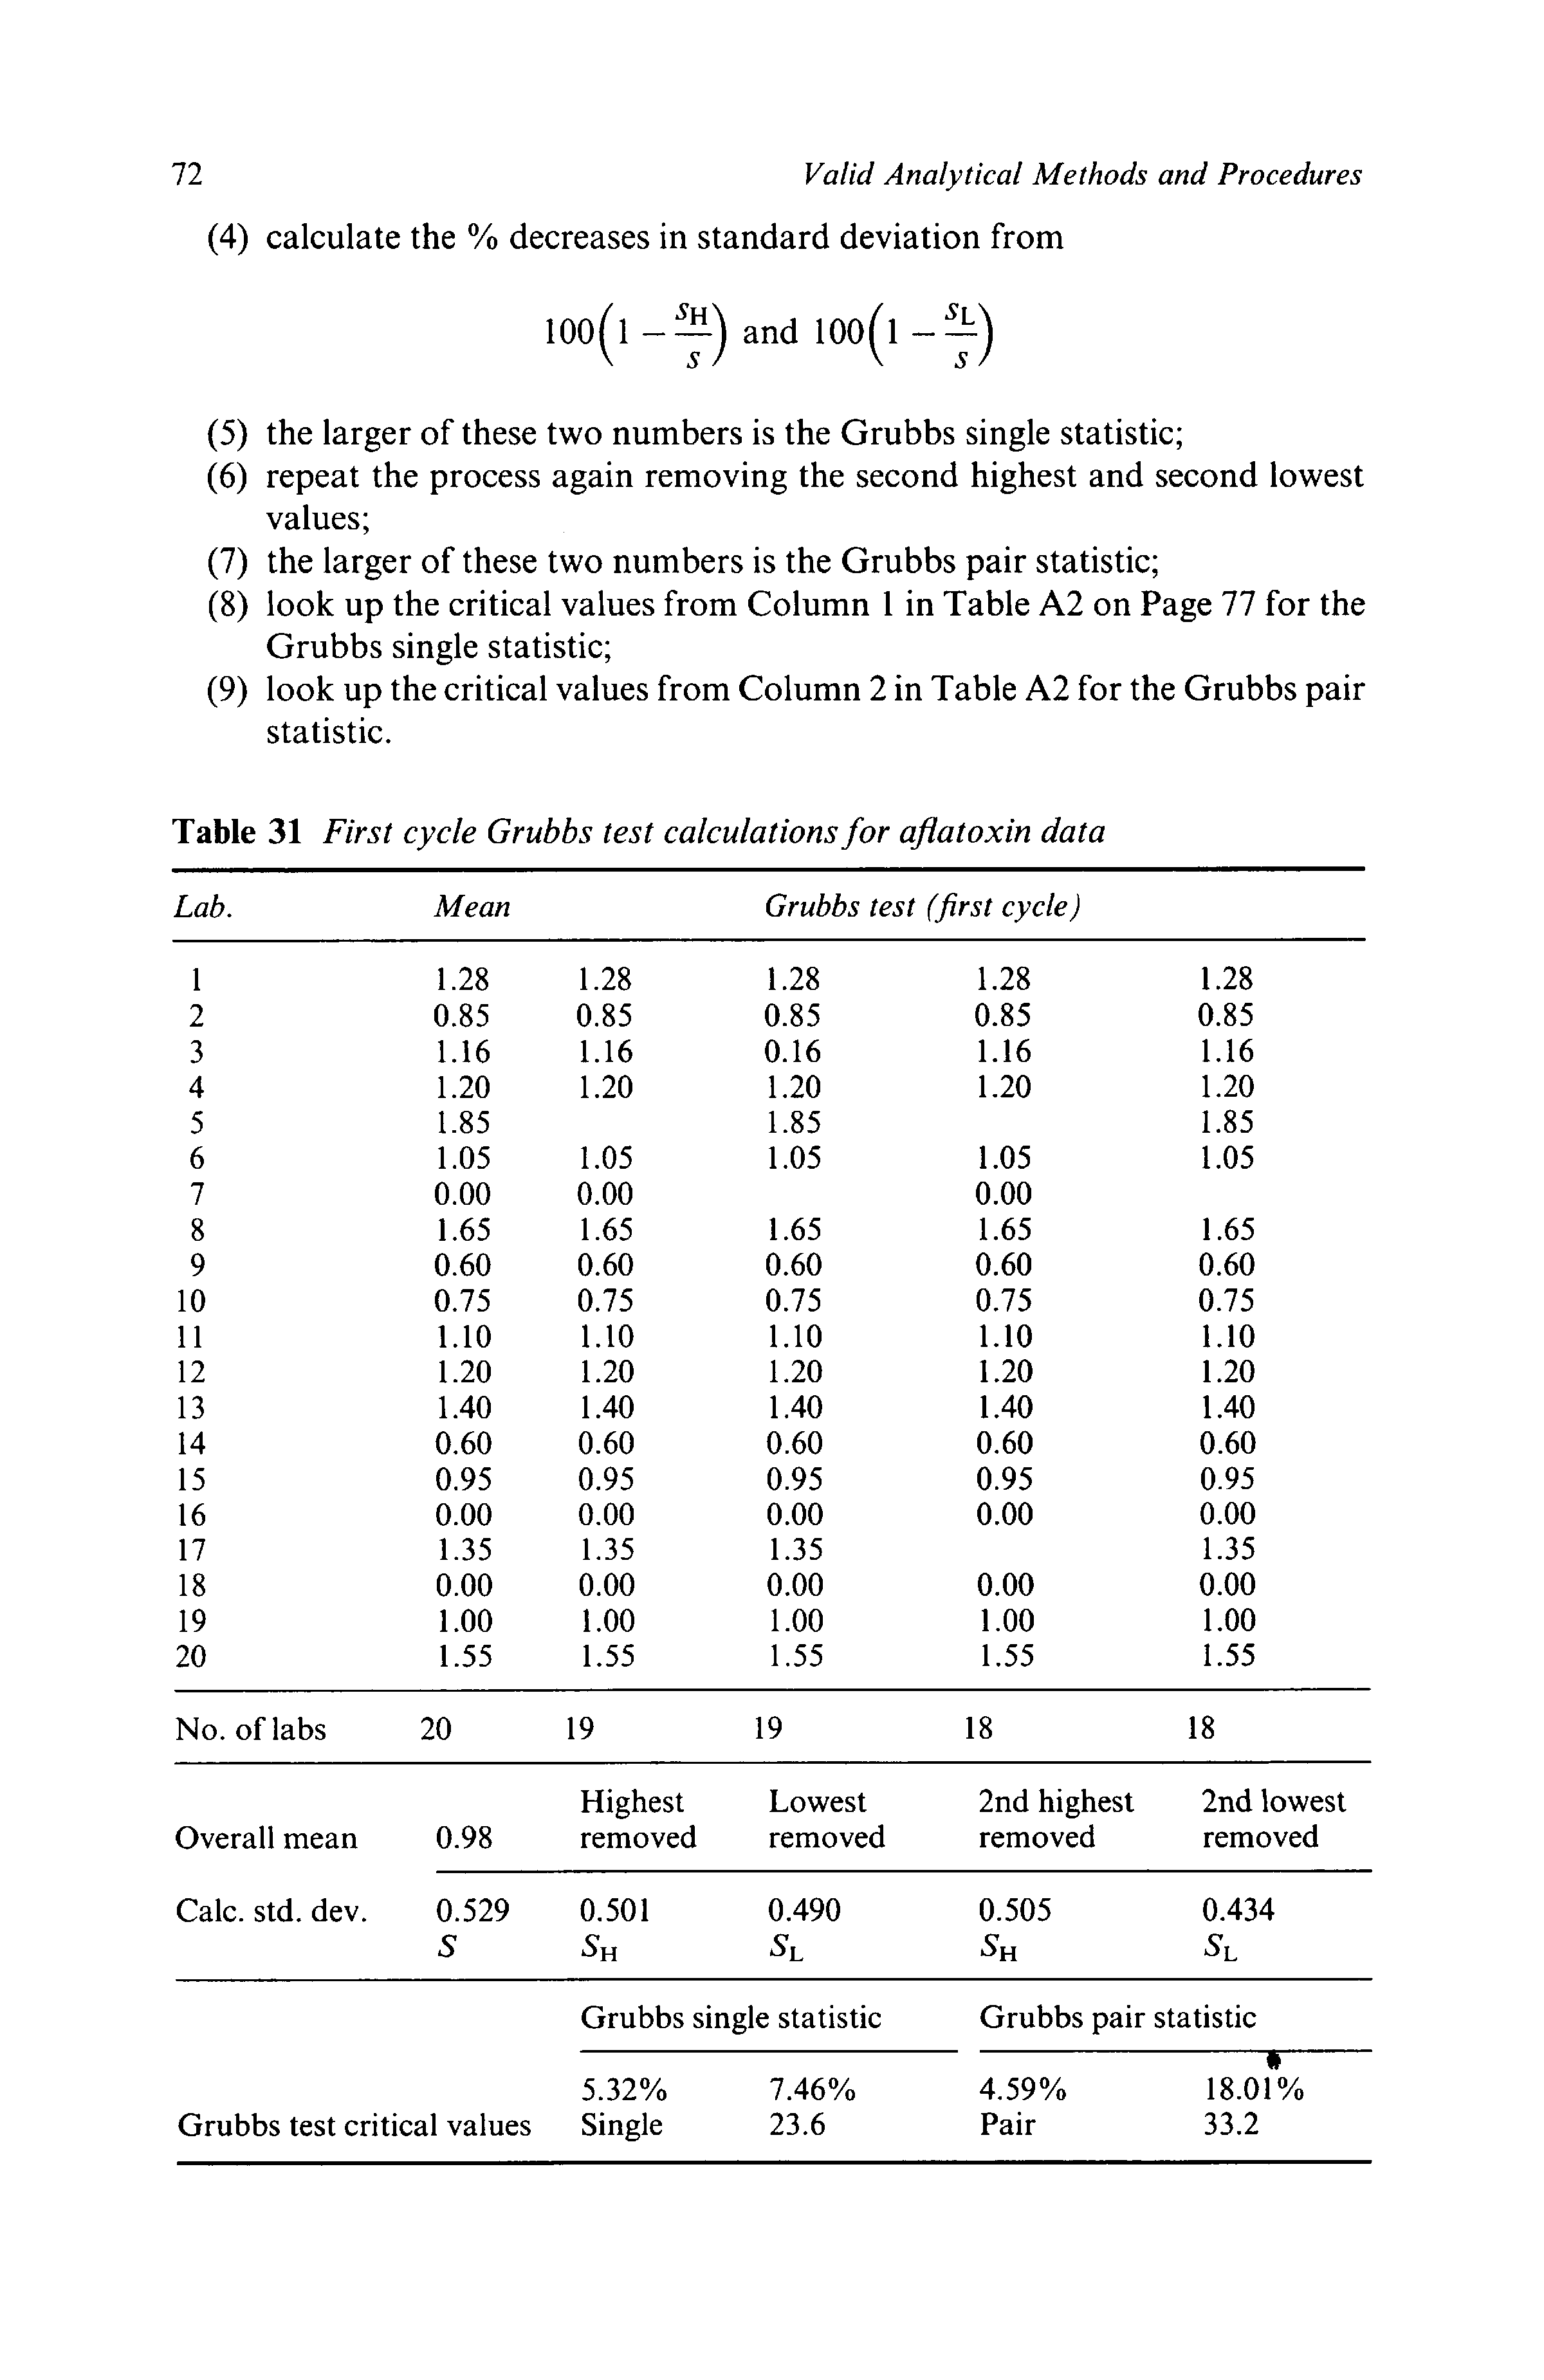 Table 31 First cycle Grubbs test calculations for aflatoxin data...